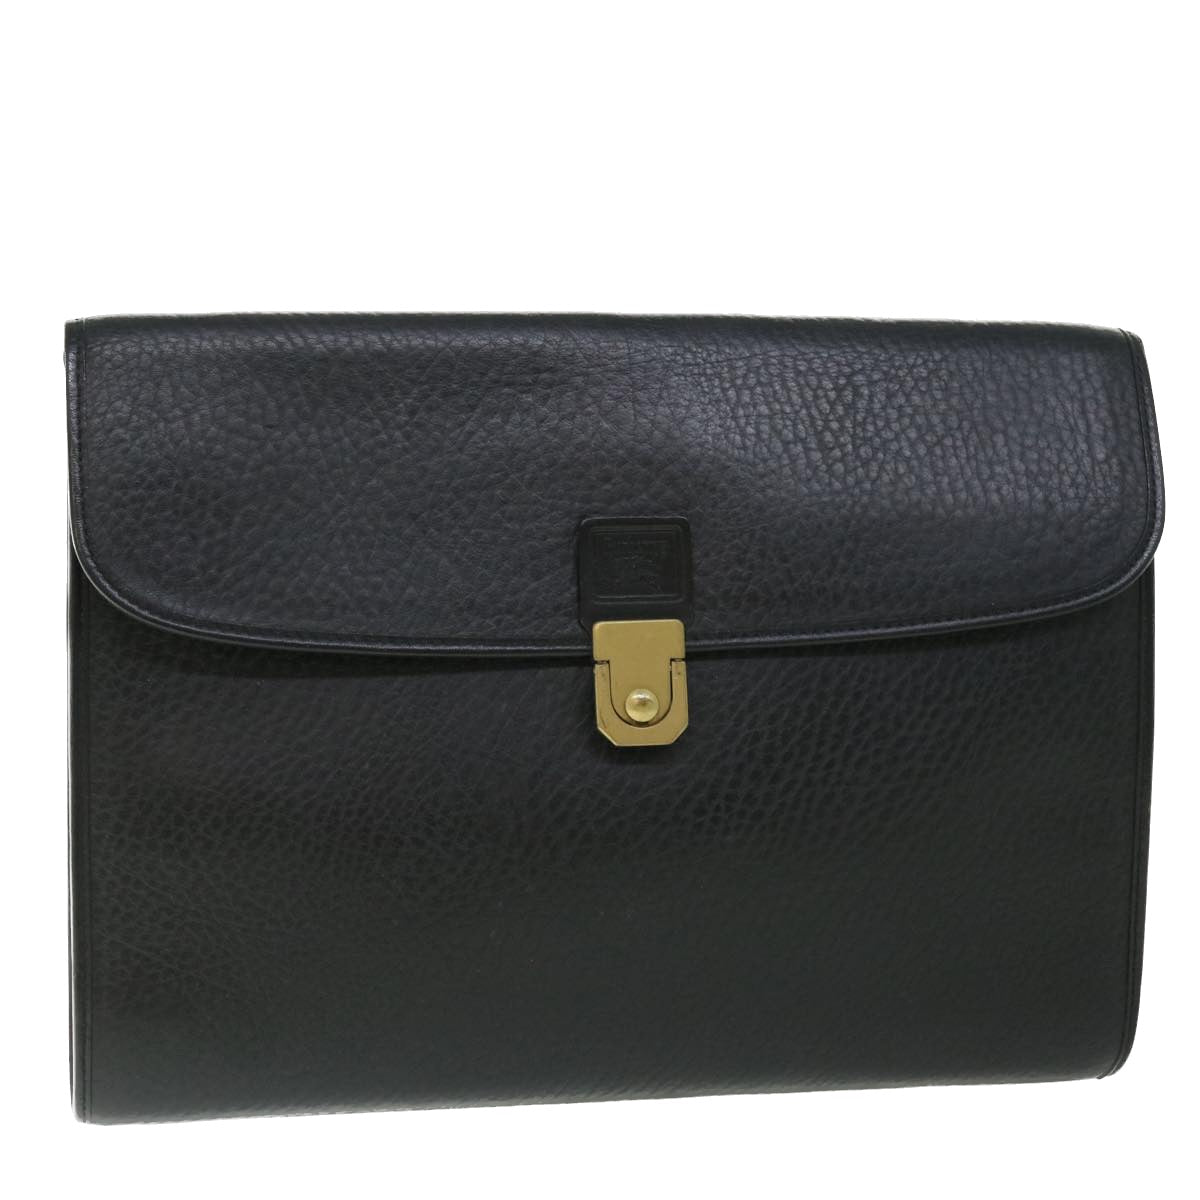 Burberrys Briefcase Leather Black Auth bs7548